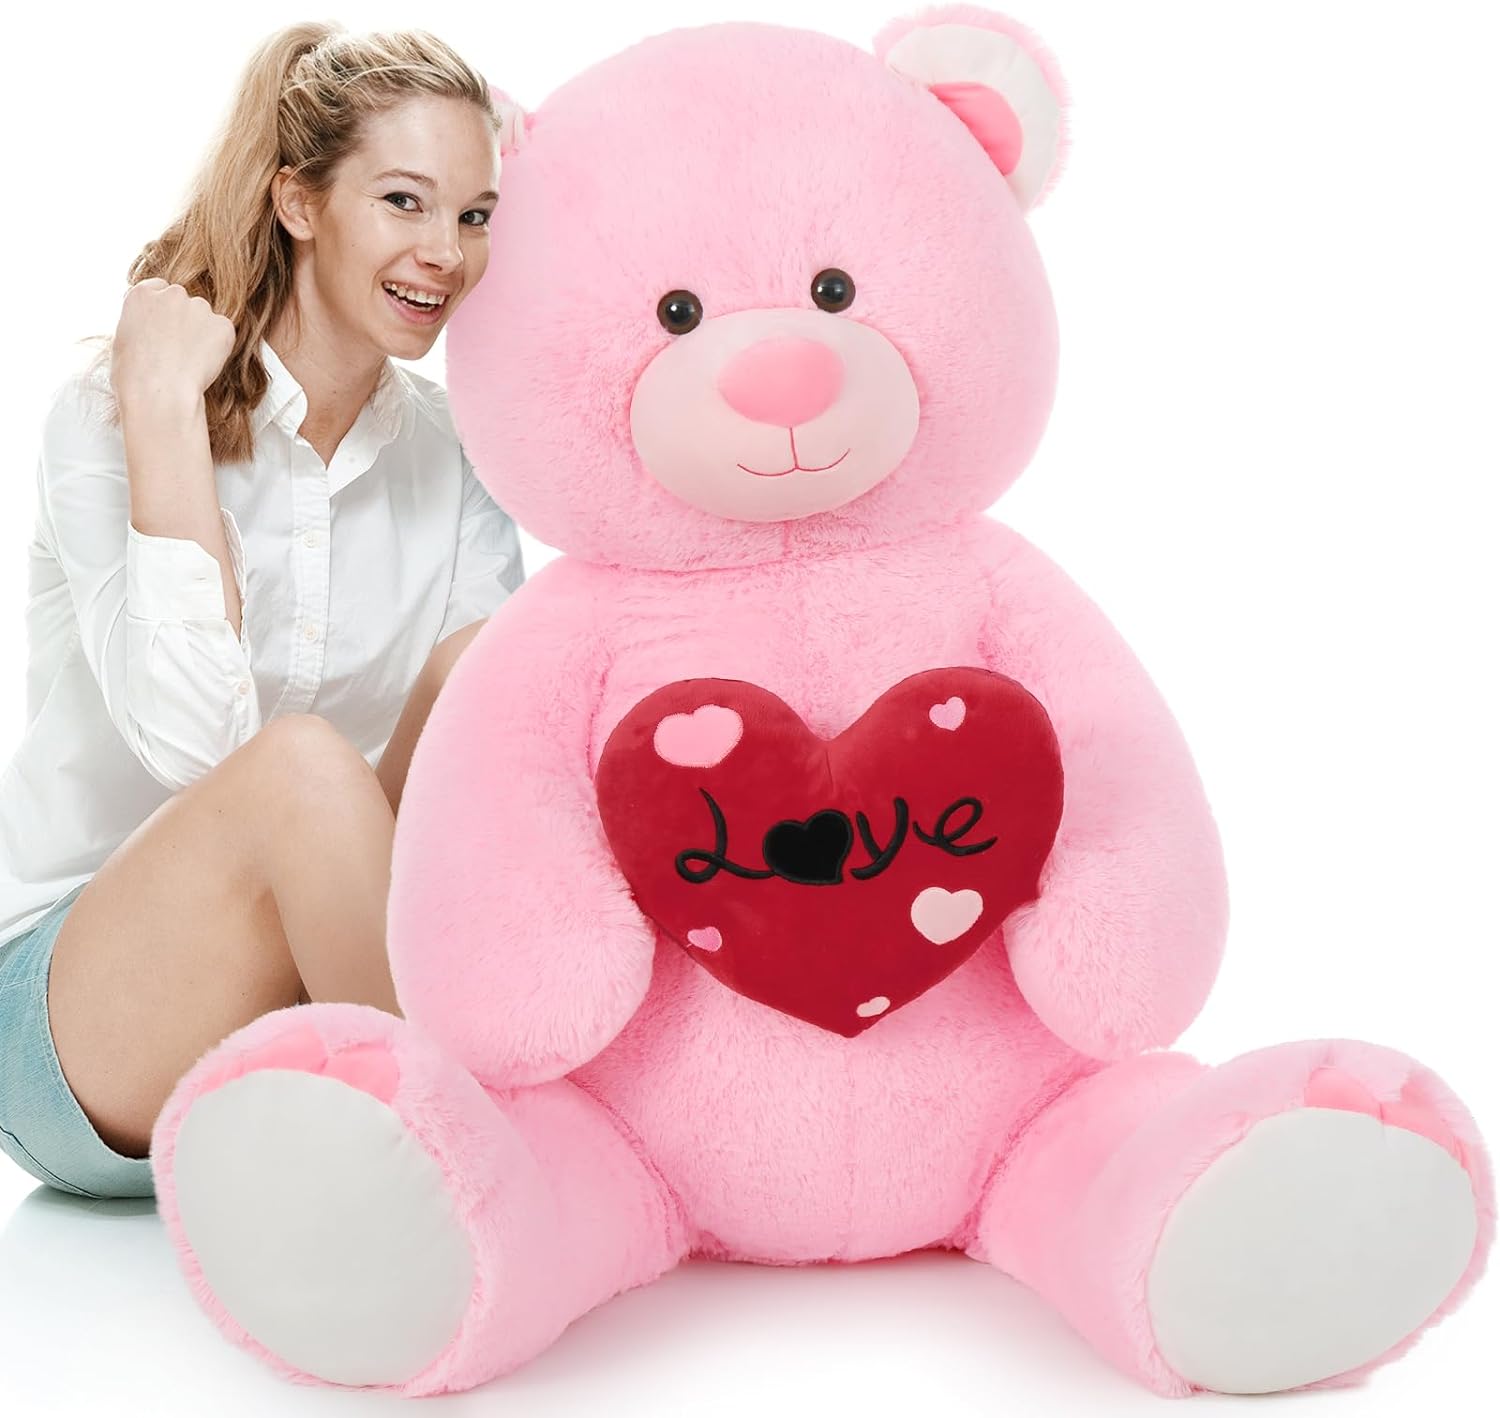 Valentine's Teddy Bear Plush Toy, Pink, 51 Inches